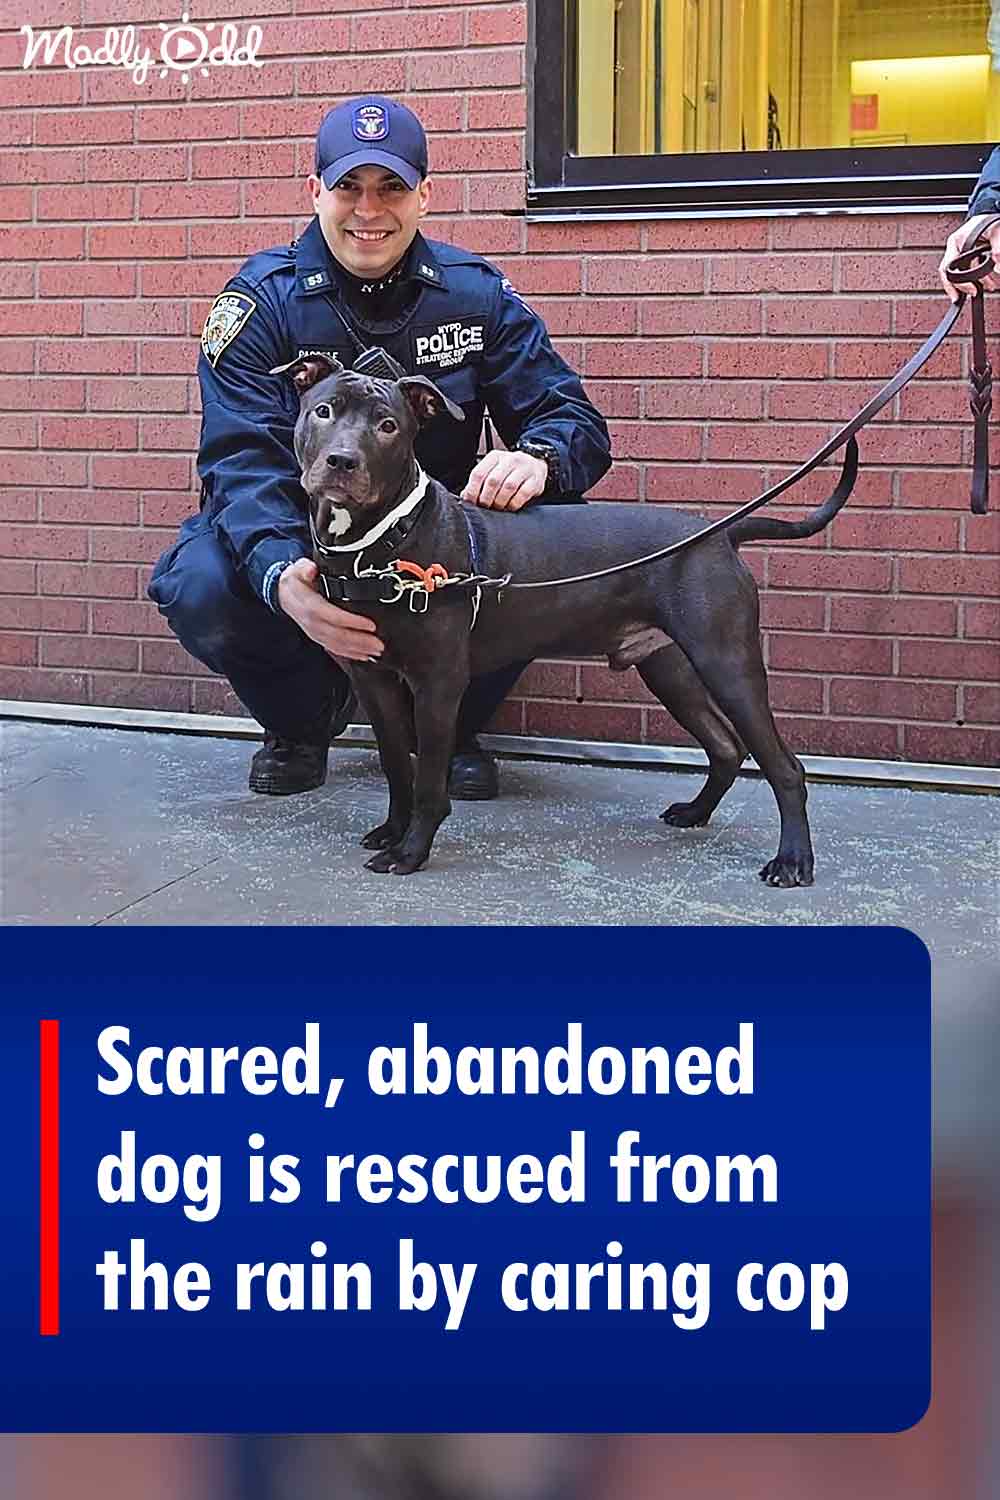 Scared, abandoned dog is rescued from the rain by caring cop